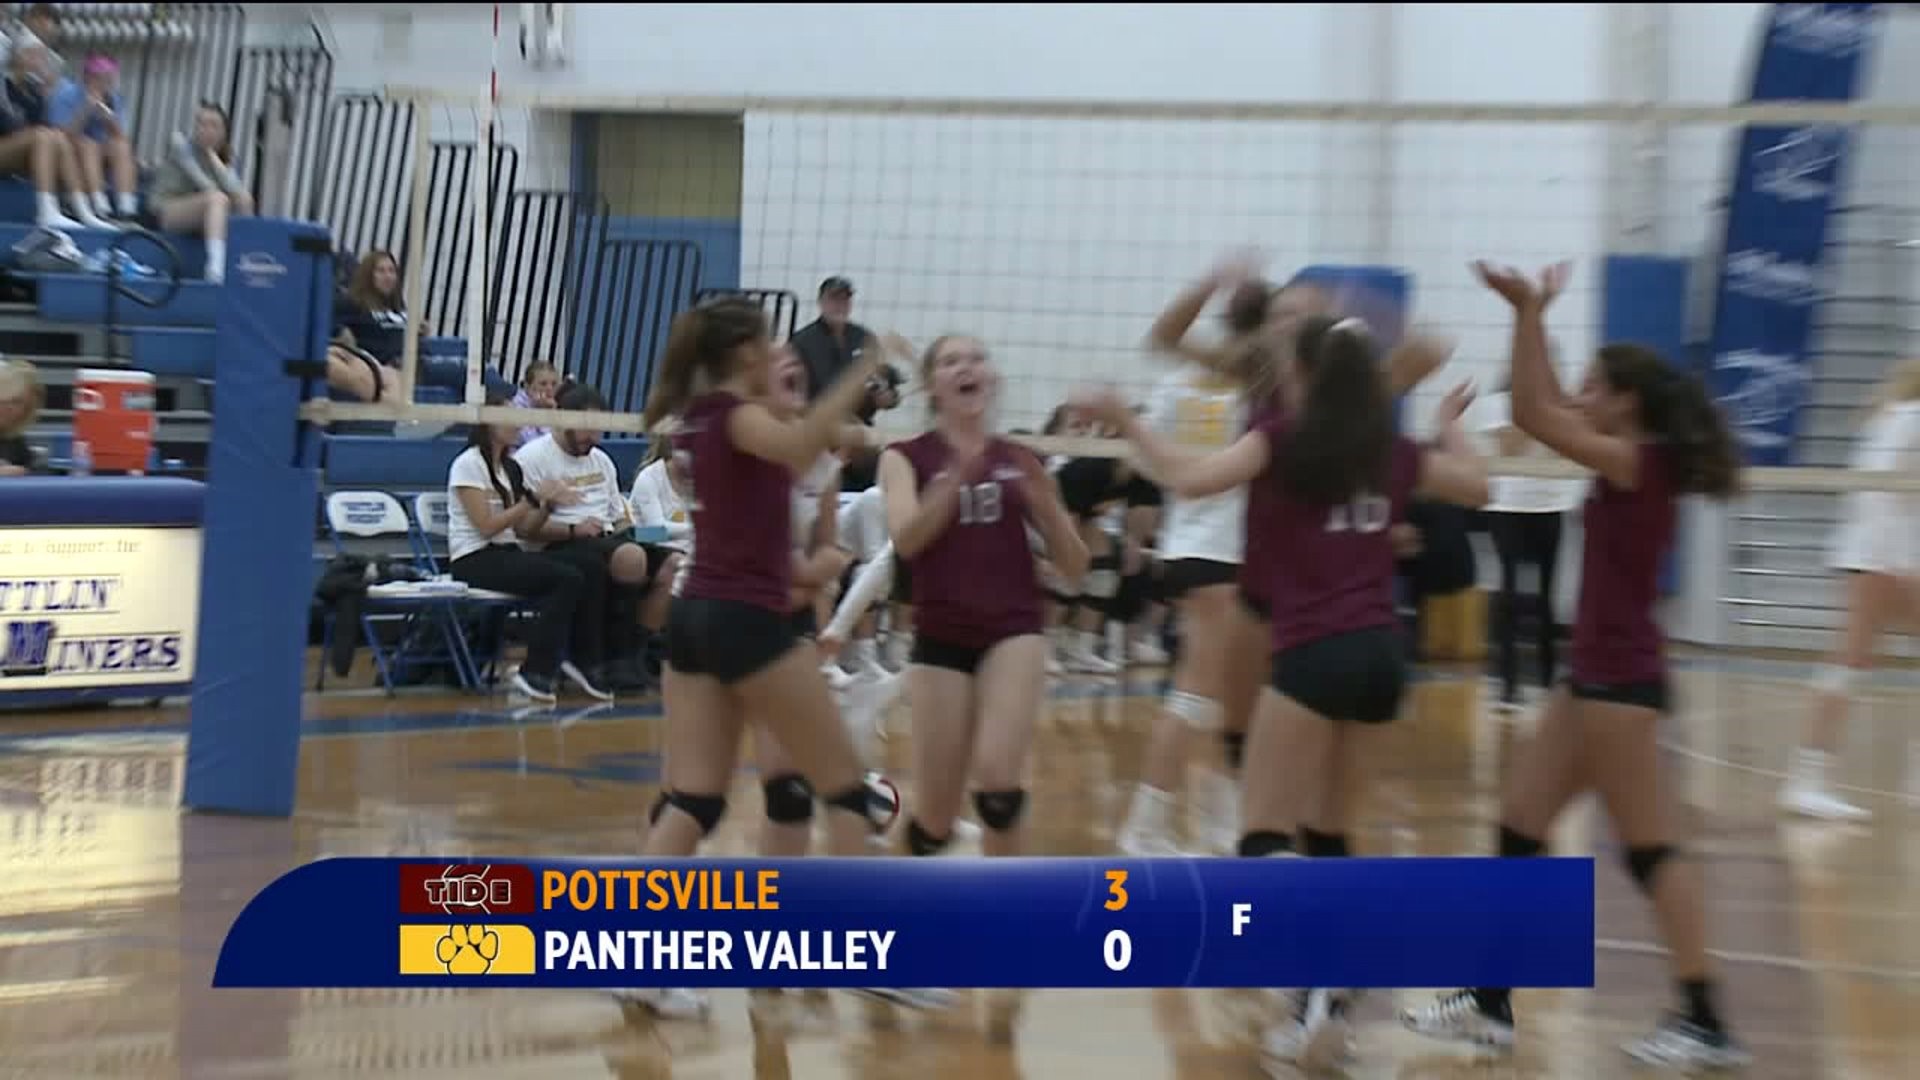 Pottsville vs Panther Valley girls volleyball